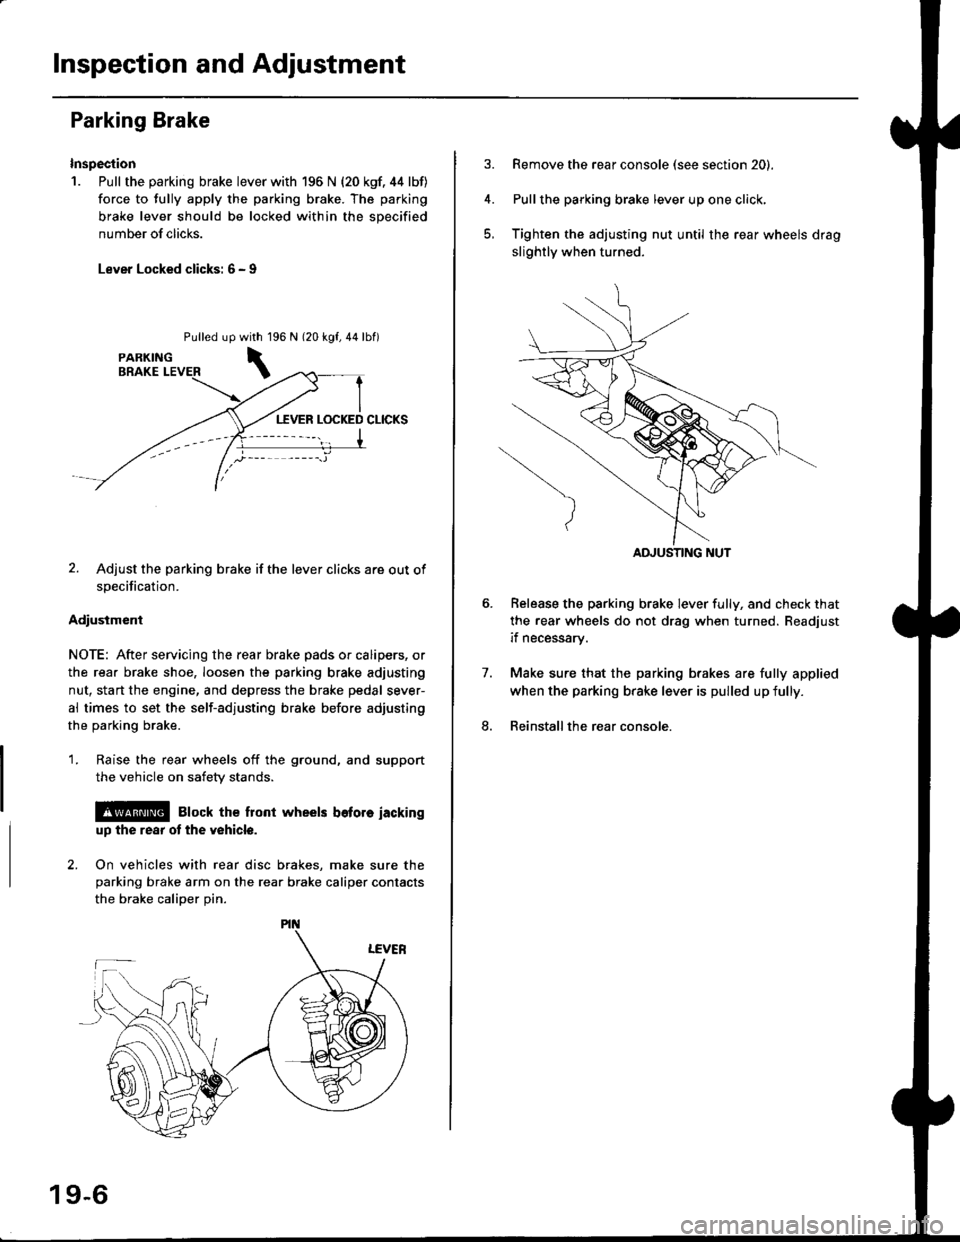 HONDA CIVIC 1996 6.G Workshop Manual Inspection and Adjustment
Parking Brake
Inspection
1. Pull the parking brake lever with 196 N {20 kgf. 44 lbf)
force to fully apply the parking brake. The parking
brake lever should be locked within t